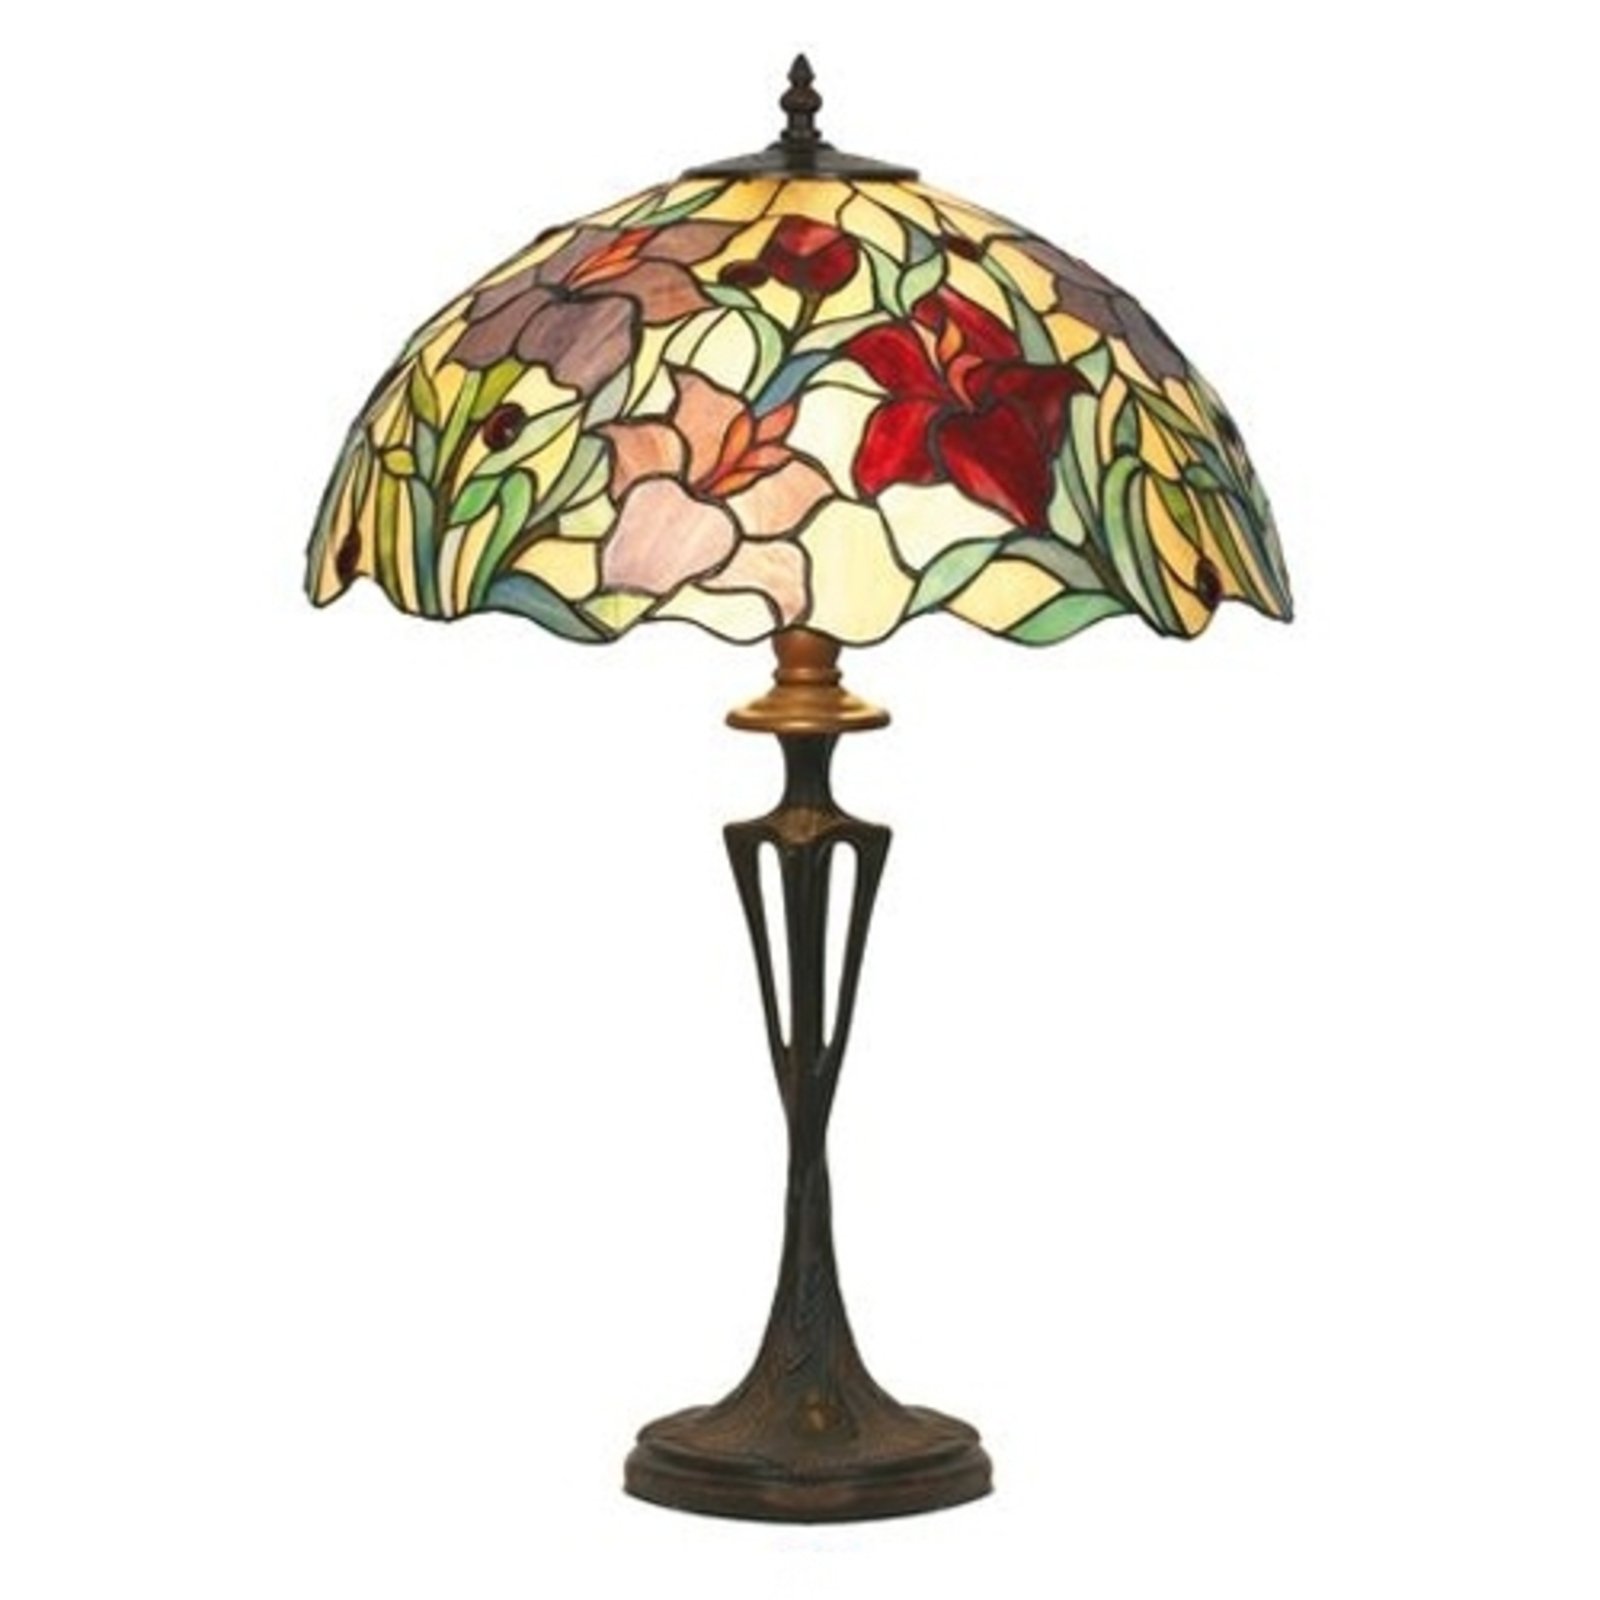 Athina table lamp in Tiffany style